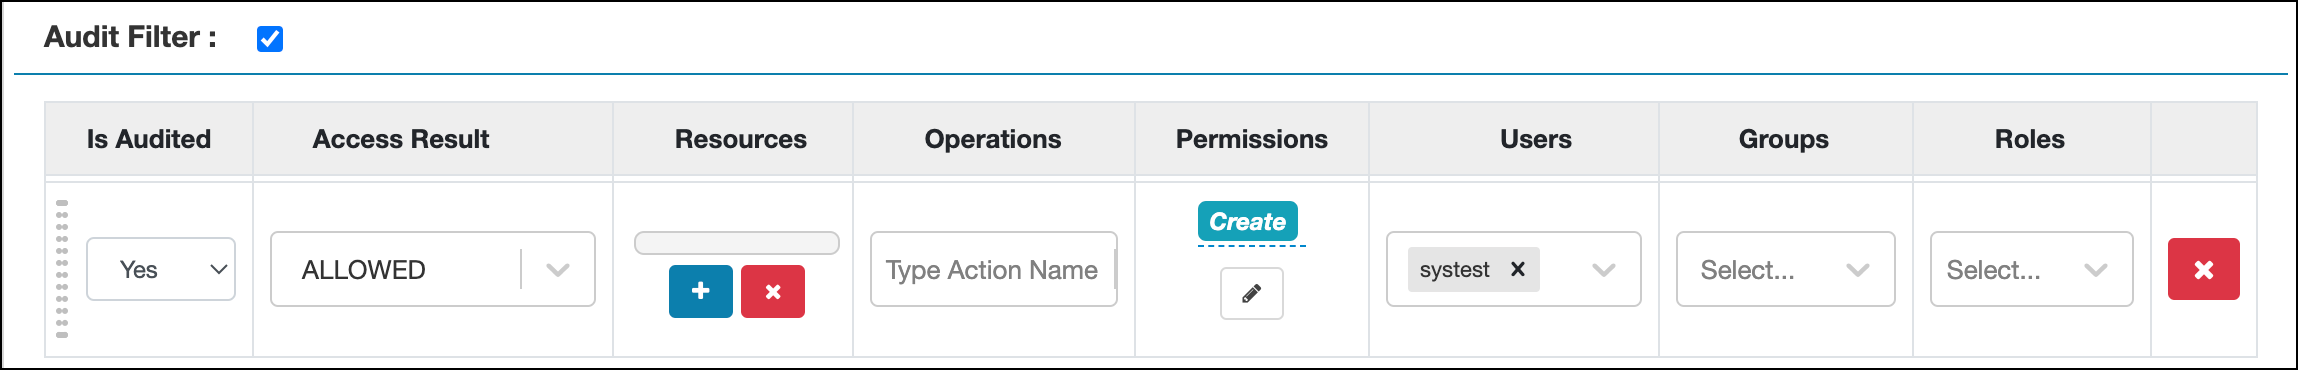 Adding an audit filter that stores user systest access=Allowed logs for Hive service